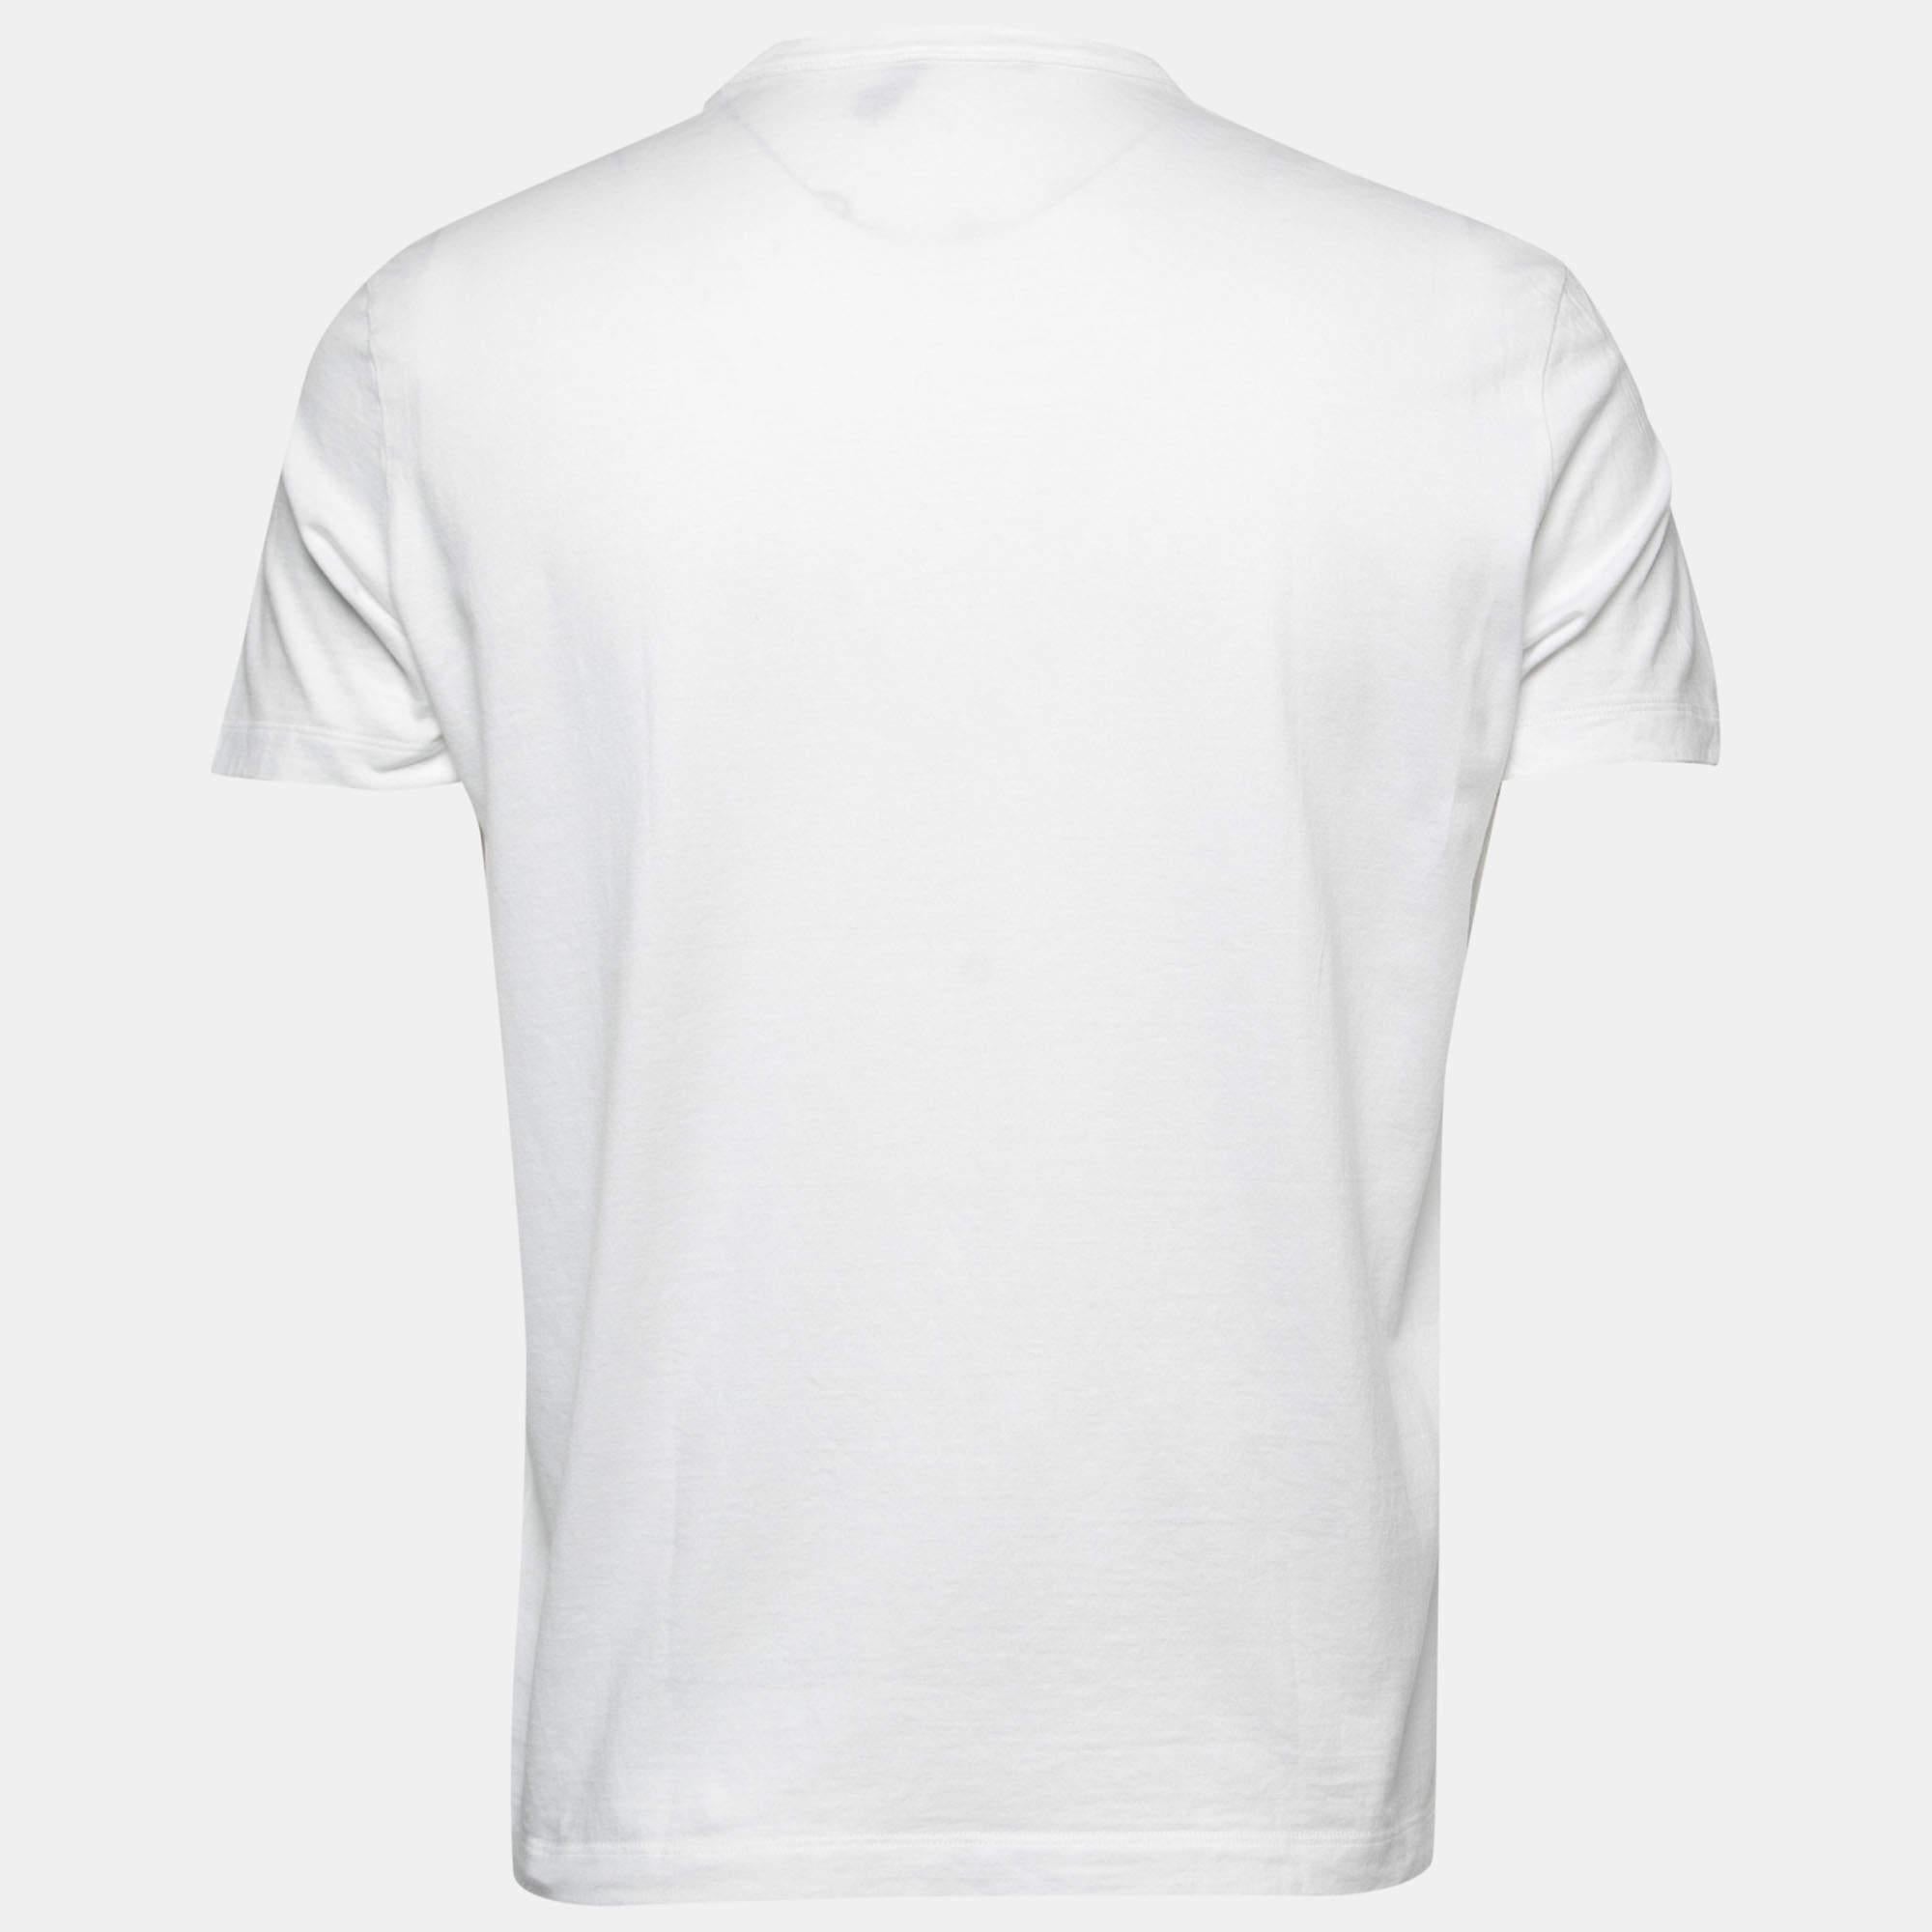 Get the style you desire as well as the comfort you need with this short-sleeve T-shirt from Louis Vuitton X Supreme. Made from quality cotton, the white T-shirt is added with a round neckline, short sleeves, and a signature print signifying both